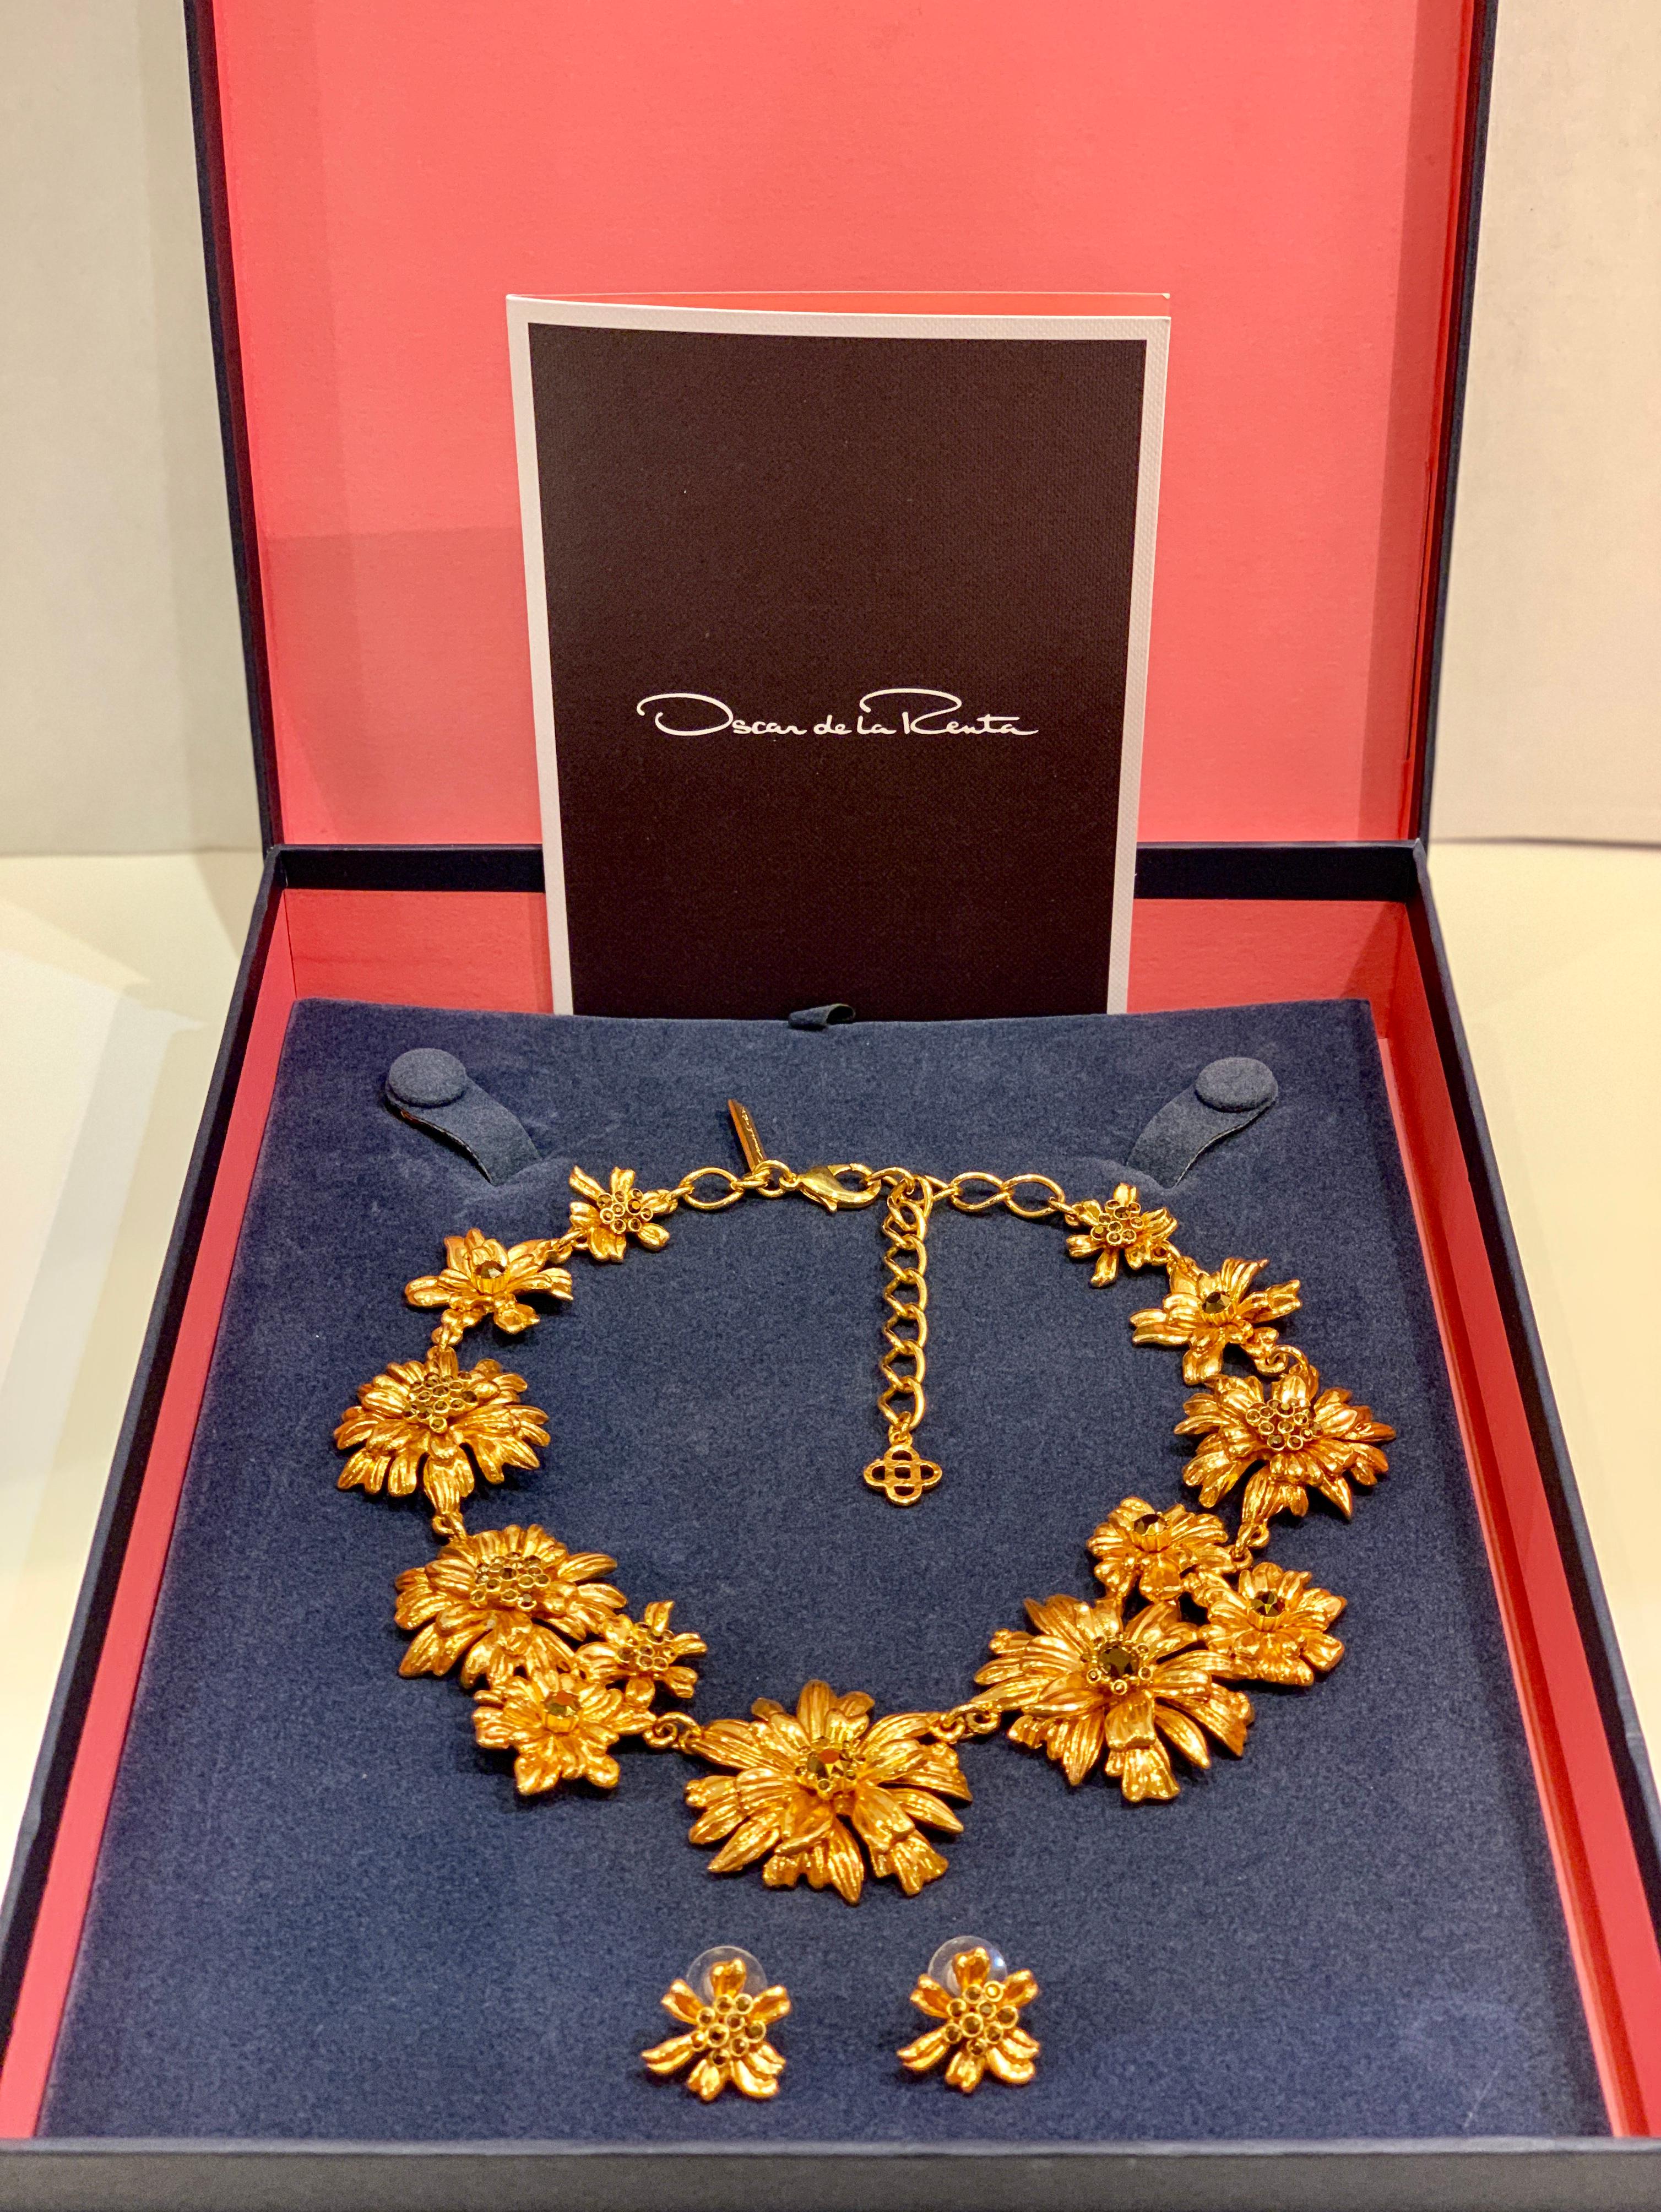 Created by the elite fashion house of Oscar de la Renta, this very substantial statement necklace features a daisy-chain of gleaming blossoms alight with sparkling Swarovski topaz crystals and is accented by matching classic flower button earrings.